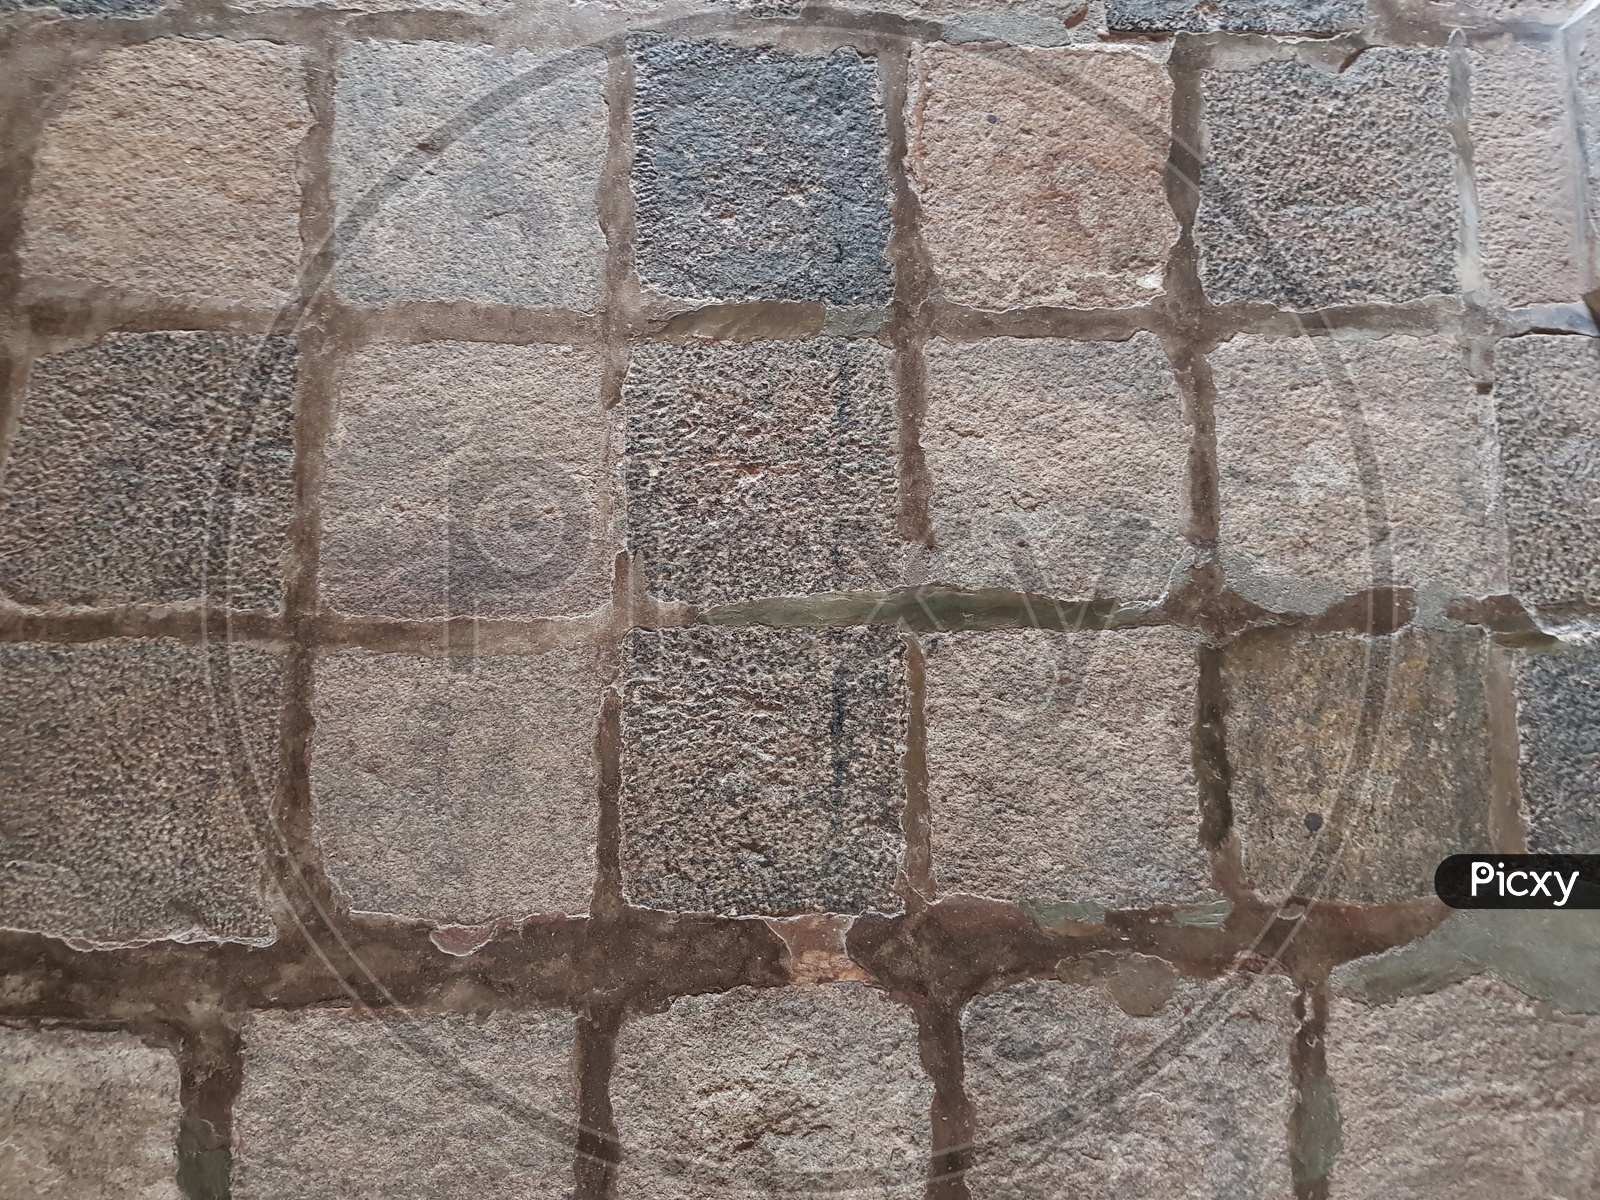 Stone Bricks Closeup With Patterns On  Foot Path  Forming a Background